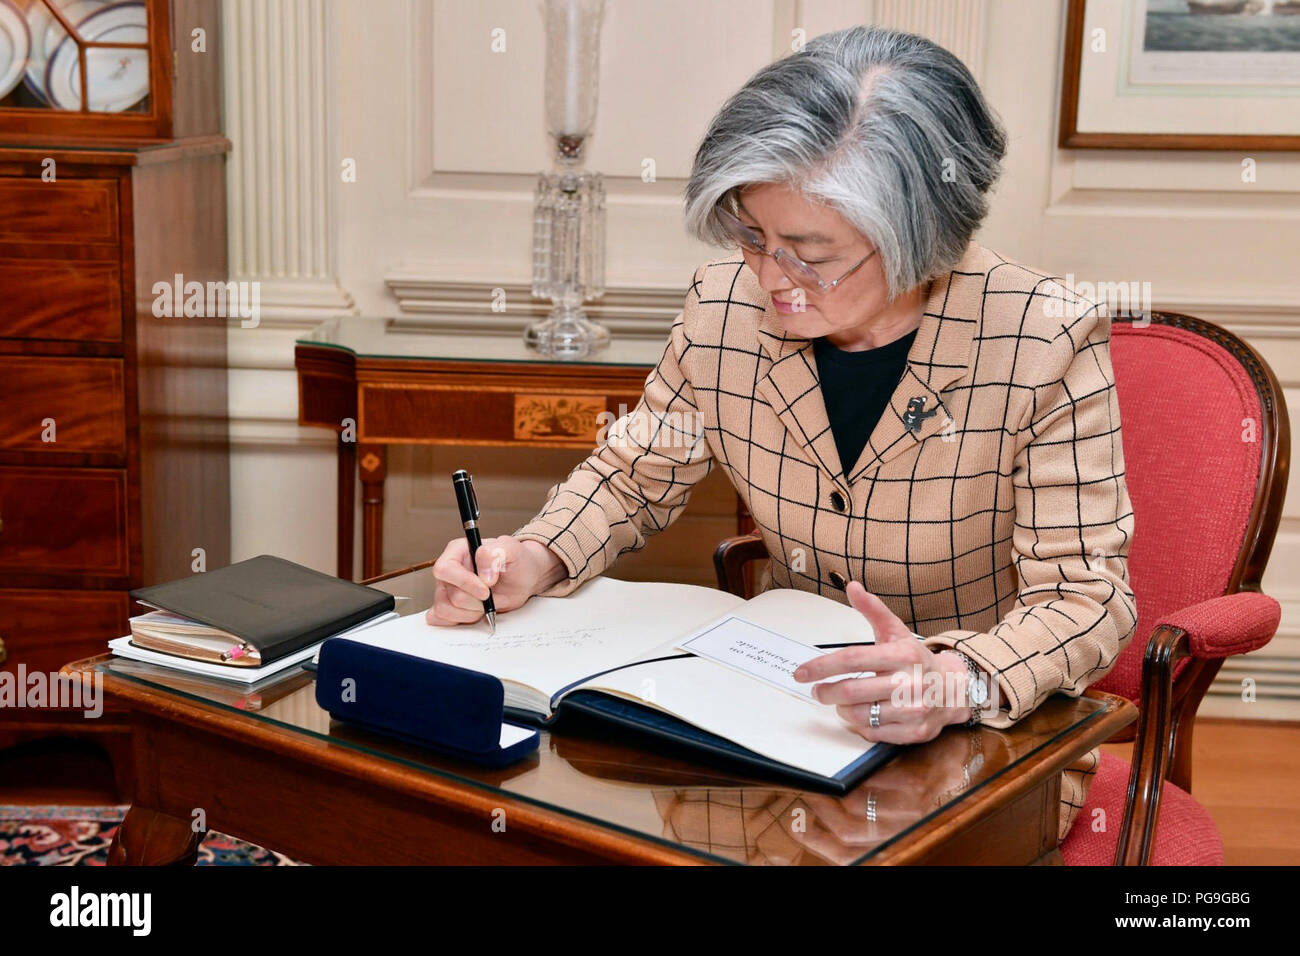 Republic of Korea Foreign Minister Kang Kyung-wha signs the guestbook before meeting Deputy Secretary of State John Sullivan at the U.S. Department of State in Washington, D.C. on March 16, 2018. Stock Photo